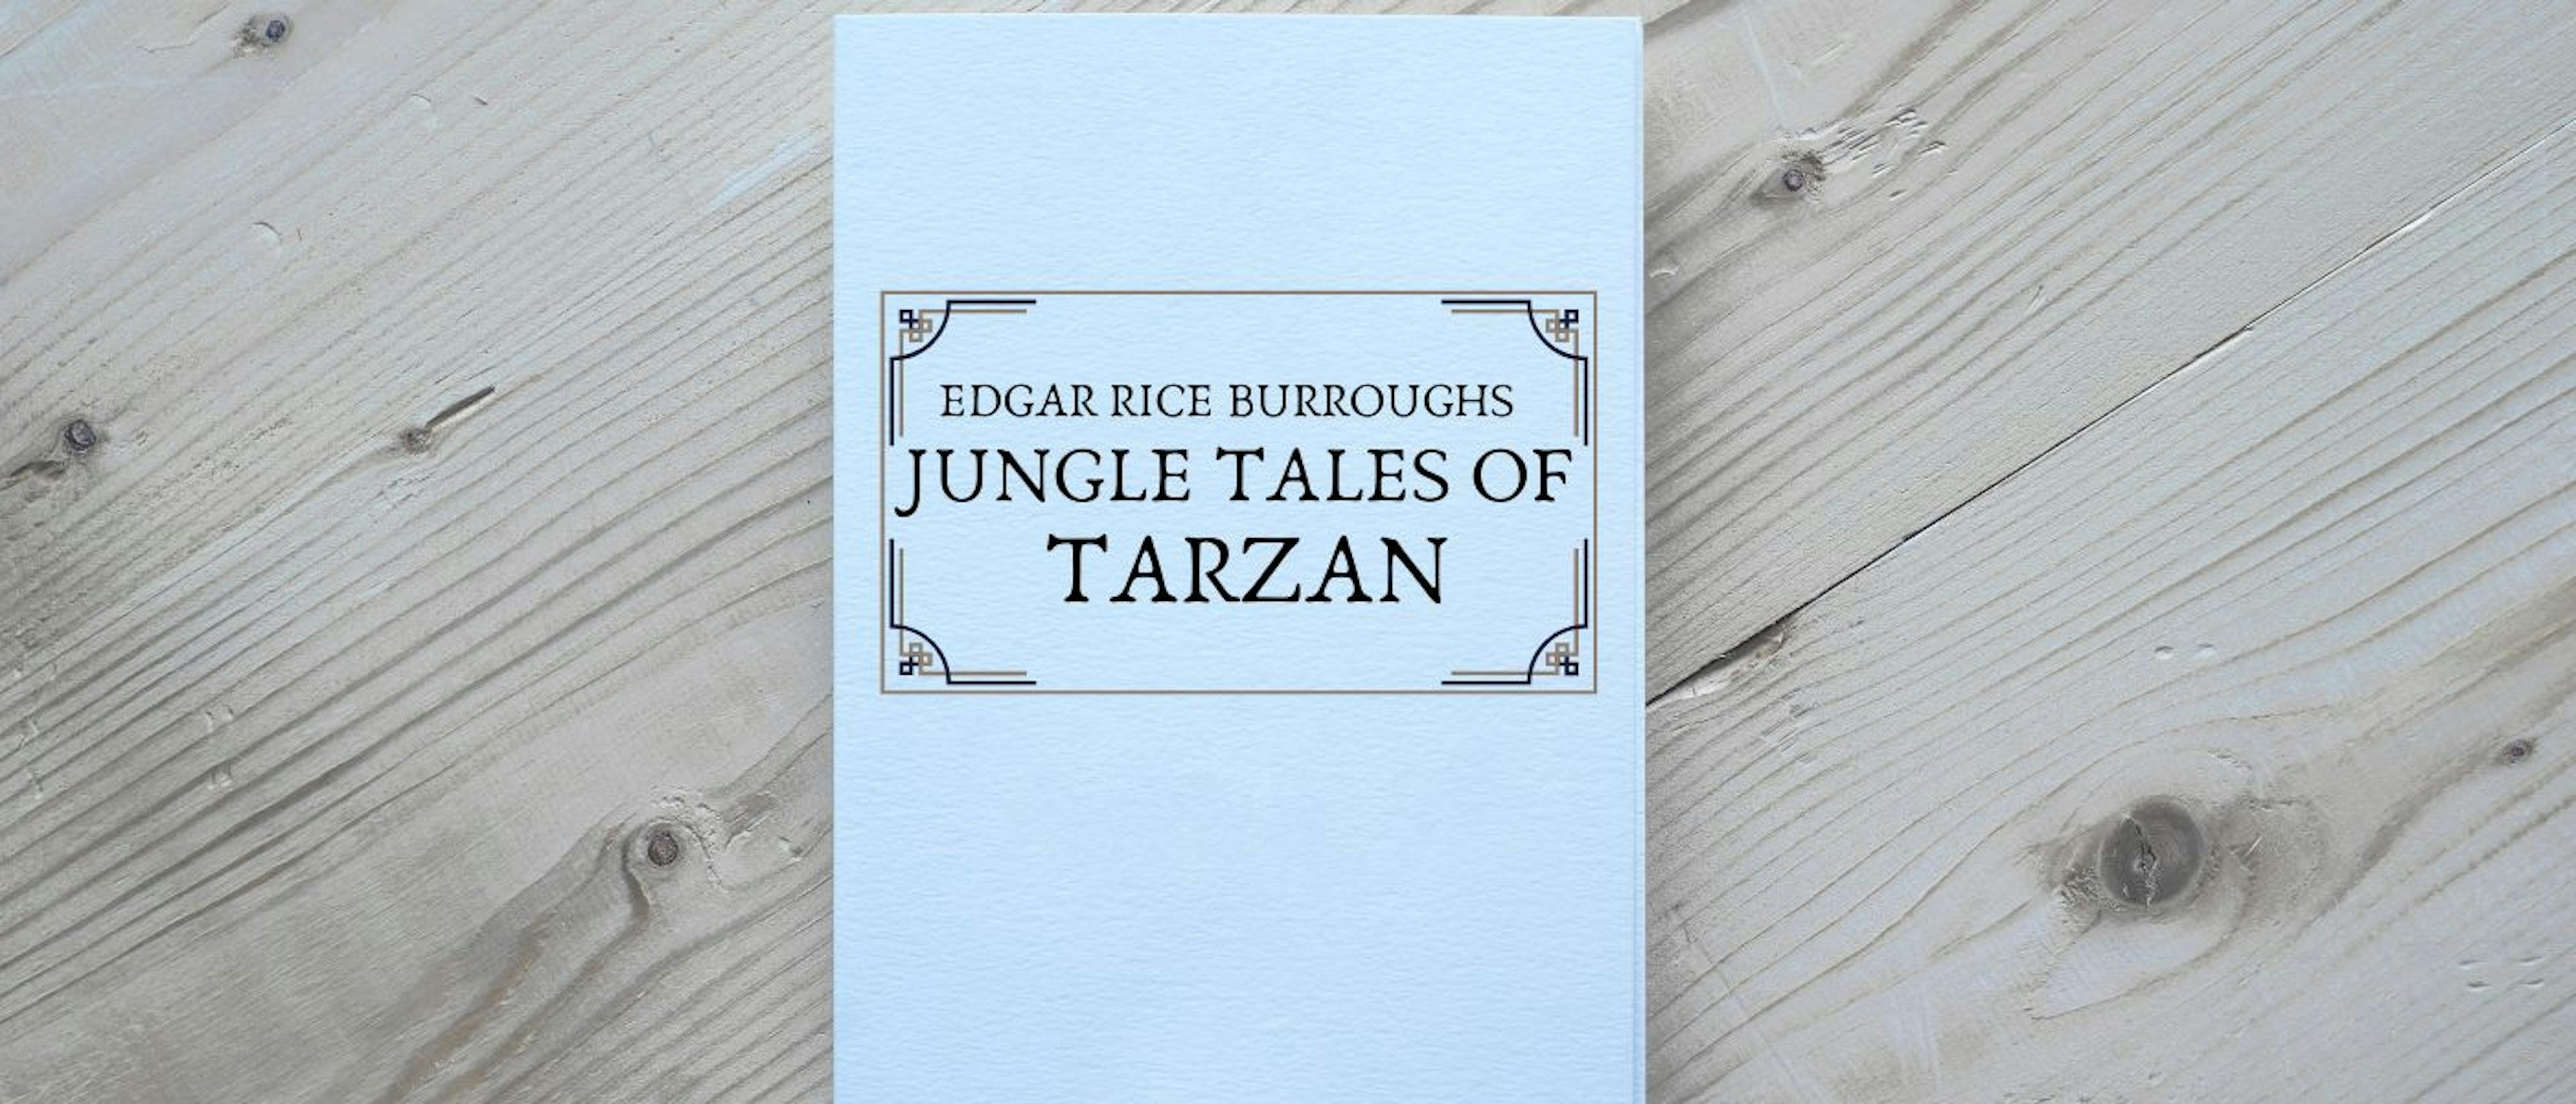 featured image - Jungle Tales of Tarzan by Edgar Rice Burroughs - Table of Links